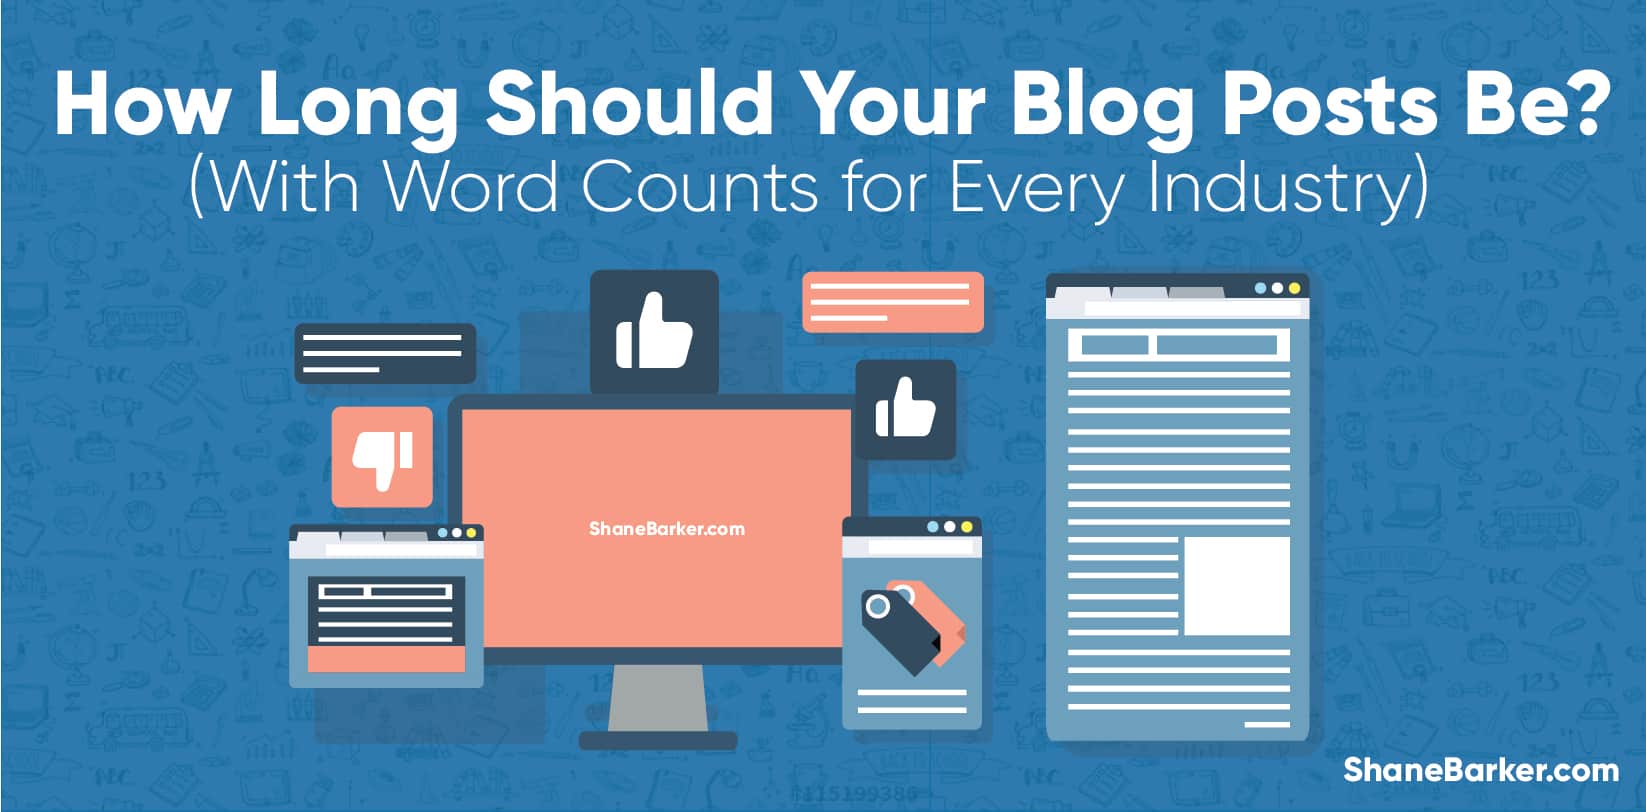 What Should Be Your Average Blog Post Length? (With Word Counts for Every Industry)